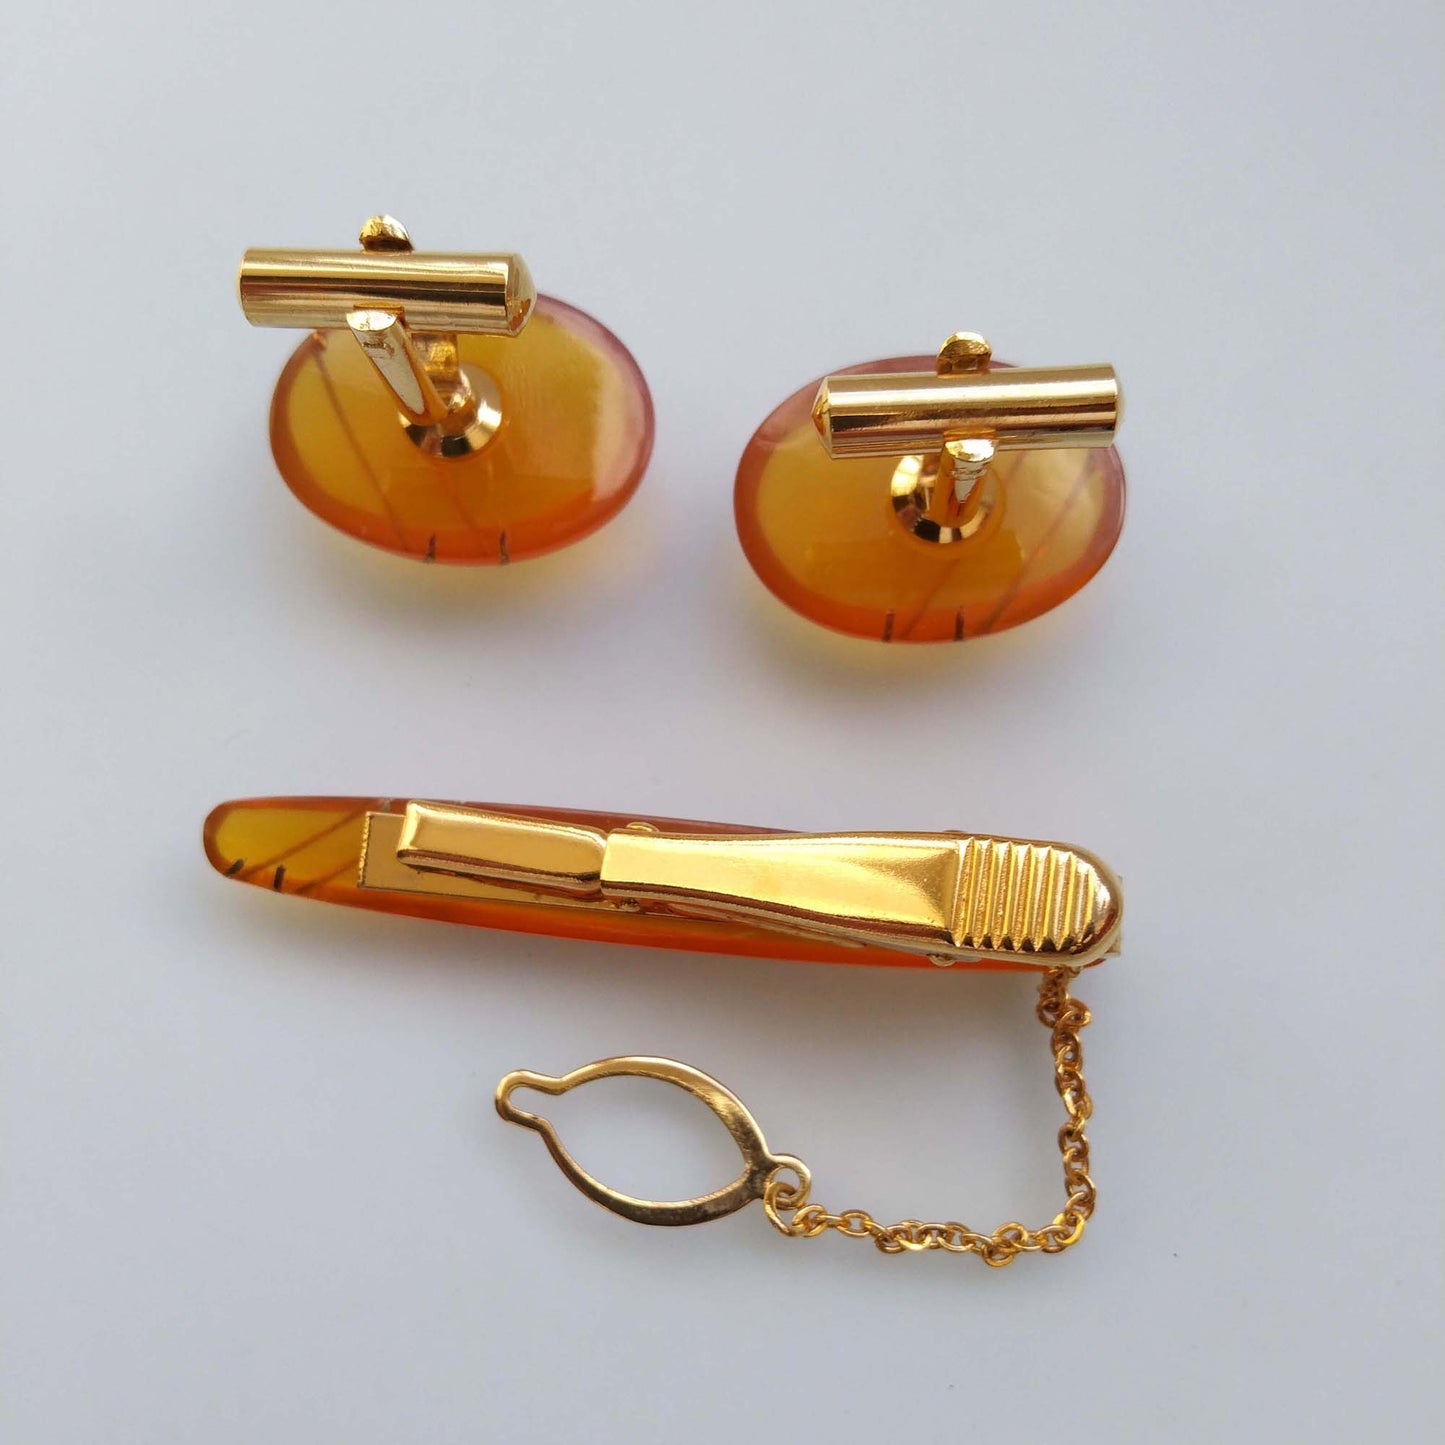 Orange Turtle Shell Cufflinks and Tie Clip Set, Gold Plated Japanese 1960s Jewelry for Men